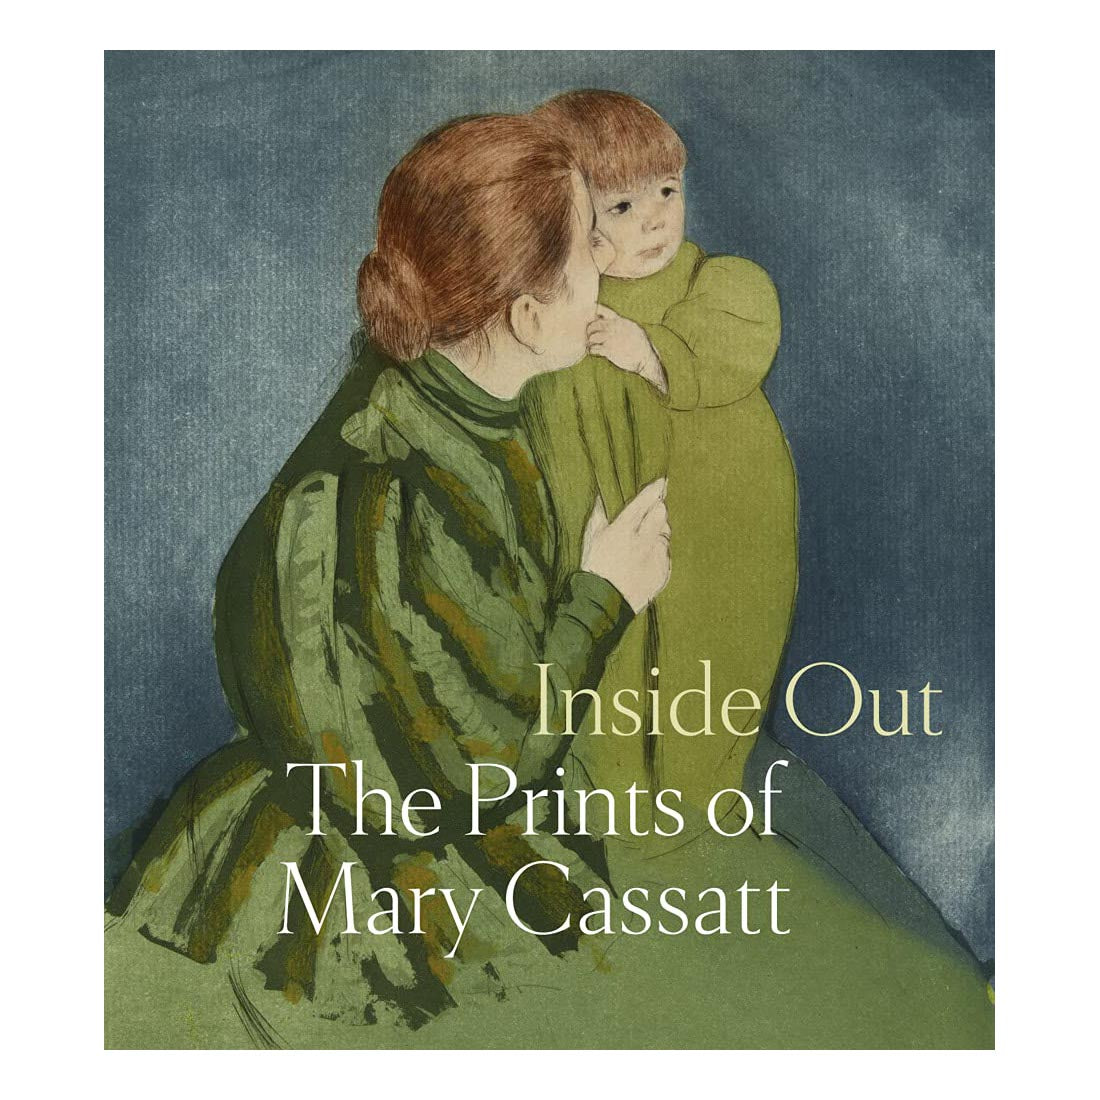 Inside Out: The Prints of Mary Cassatt